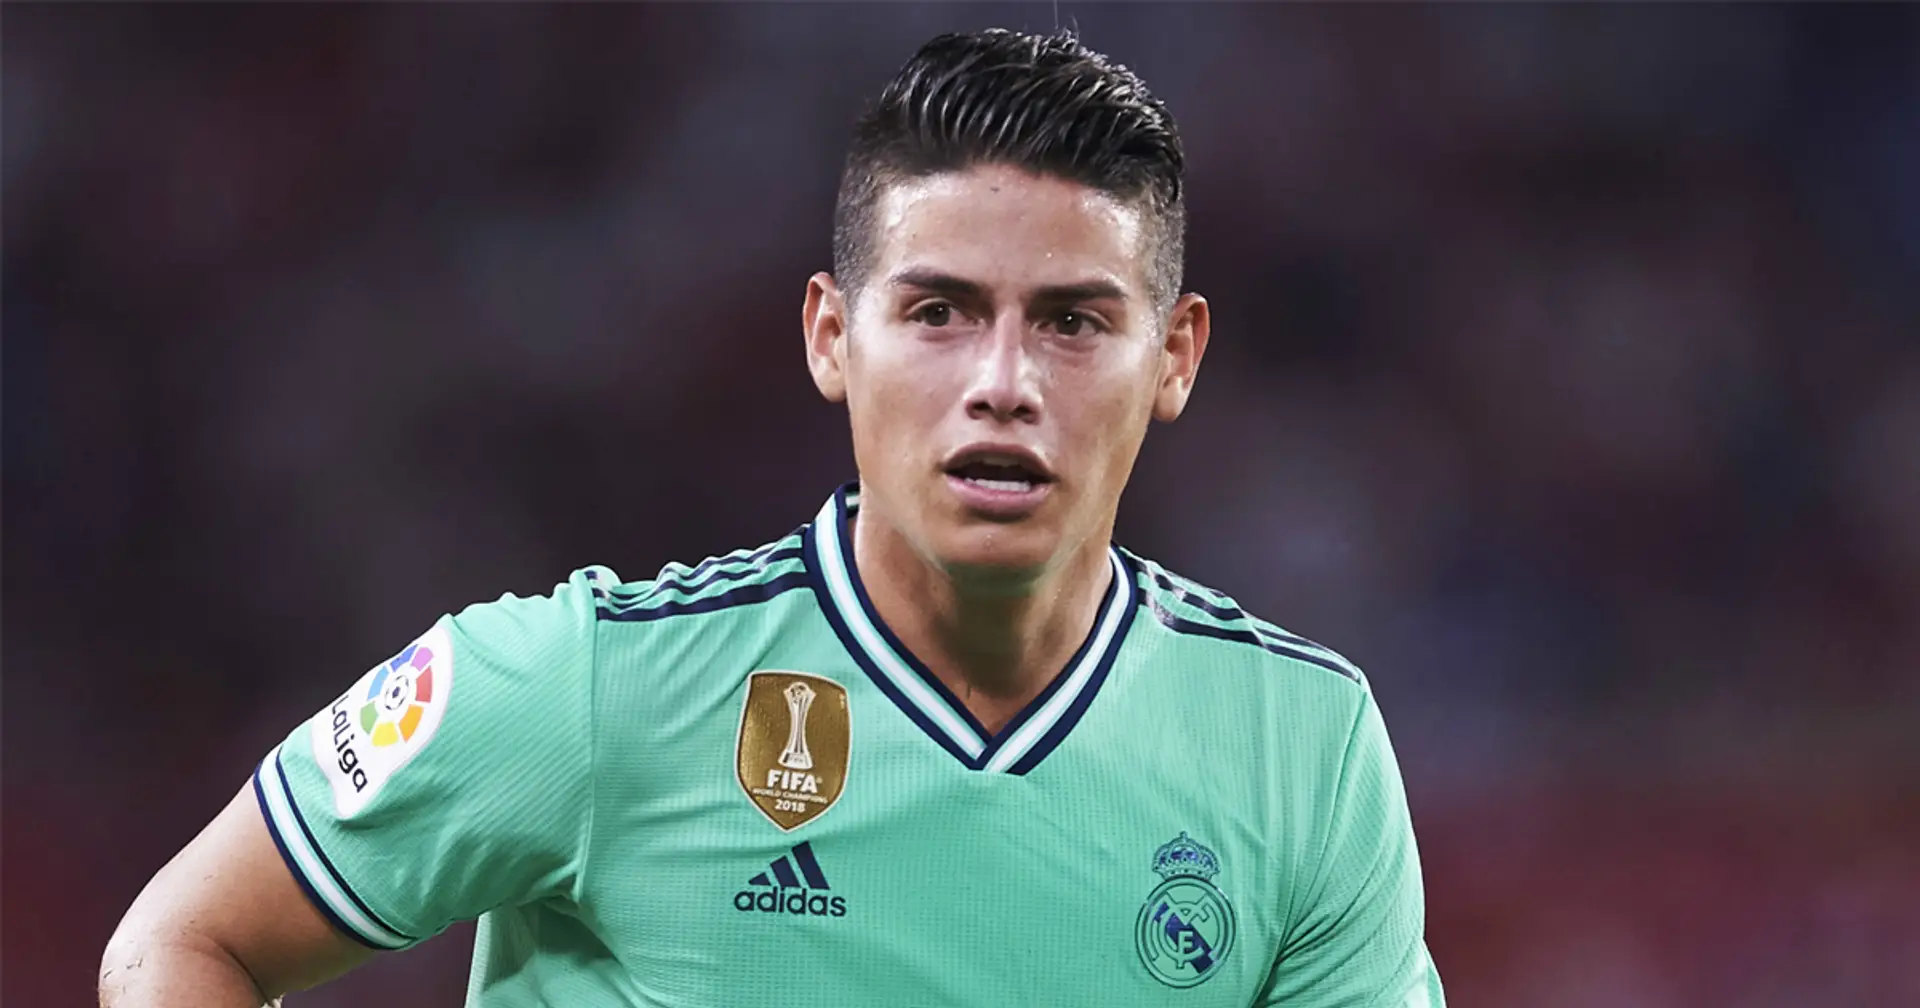 Arsenal-linked James Rodgriguez reportedly available at cut price